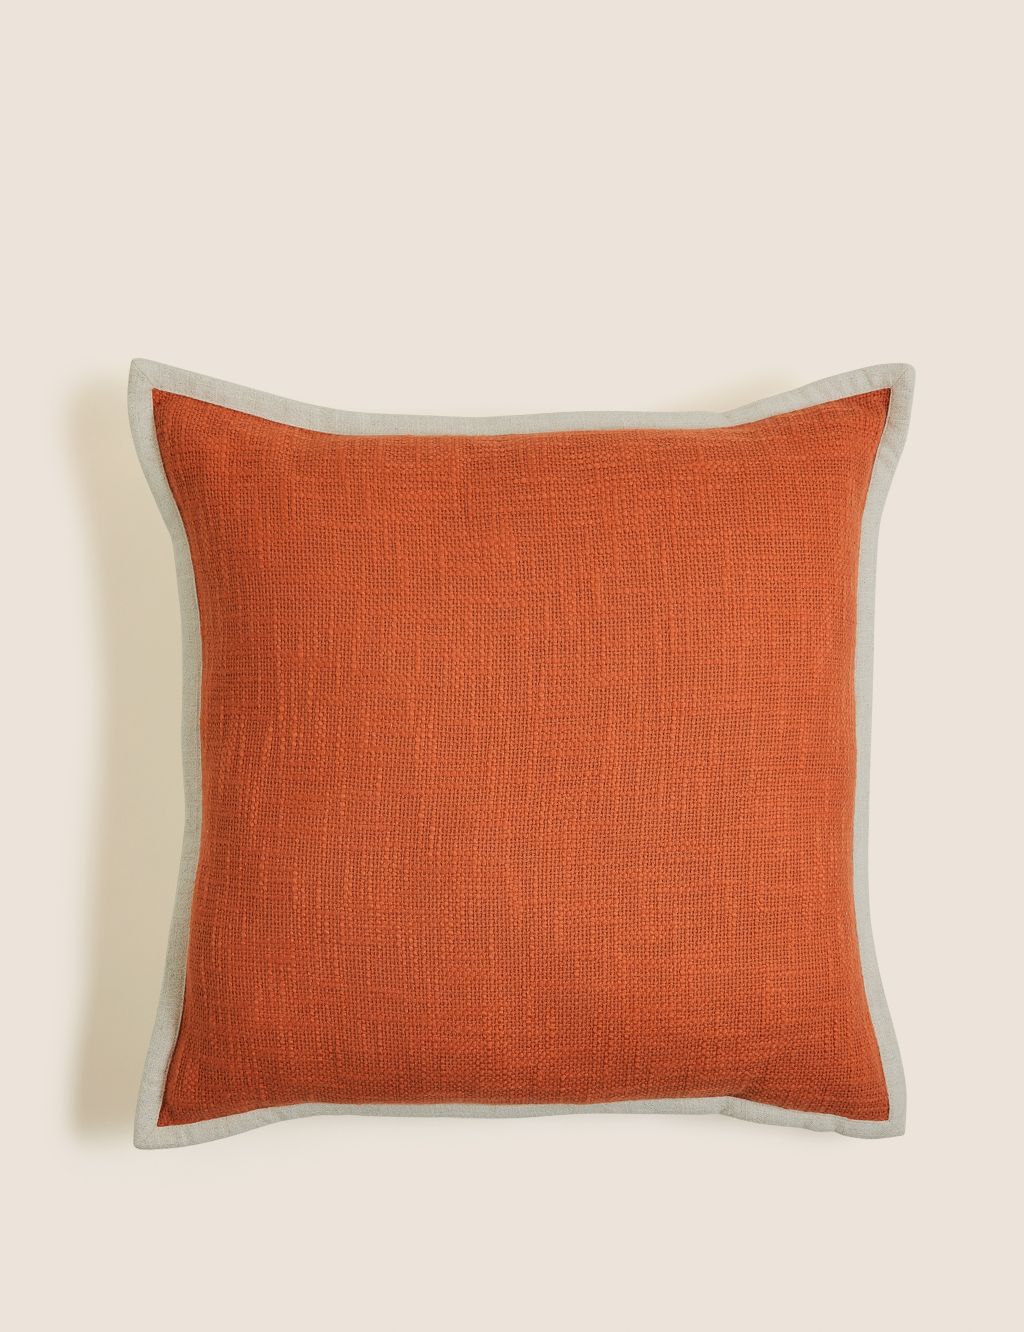 Cotton with Linen Textured Cushion image 1